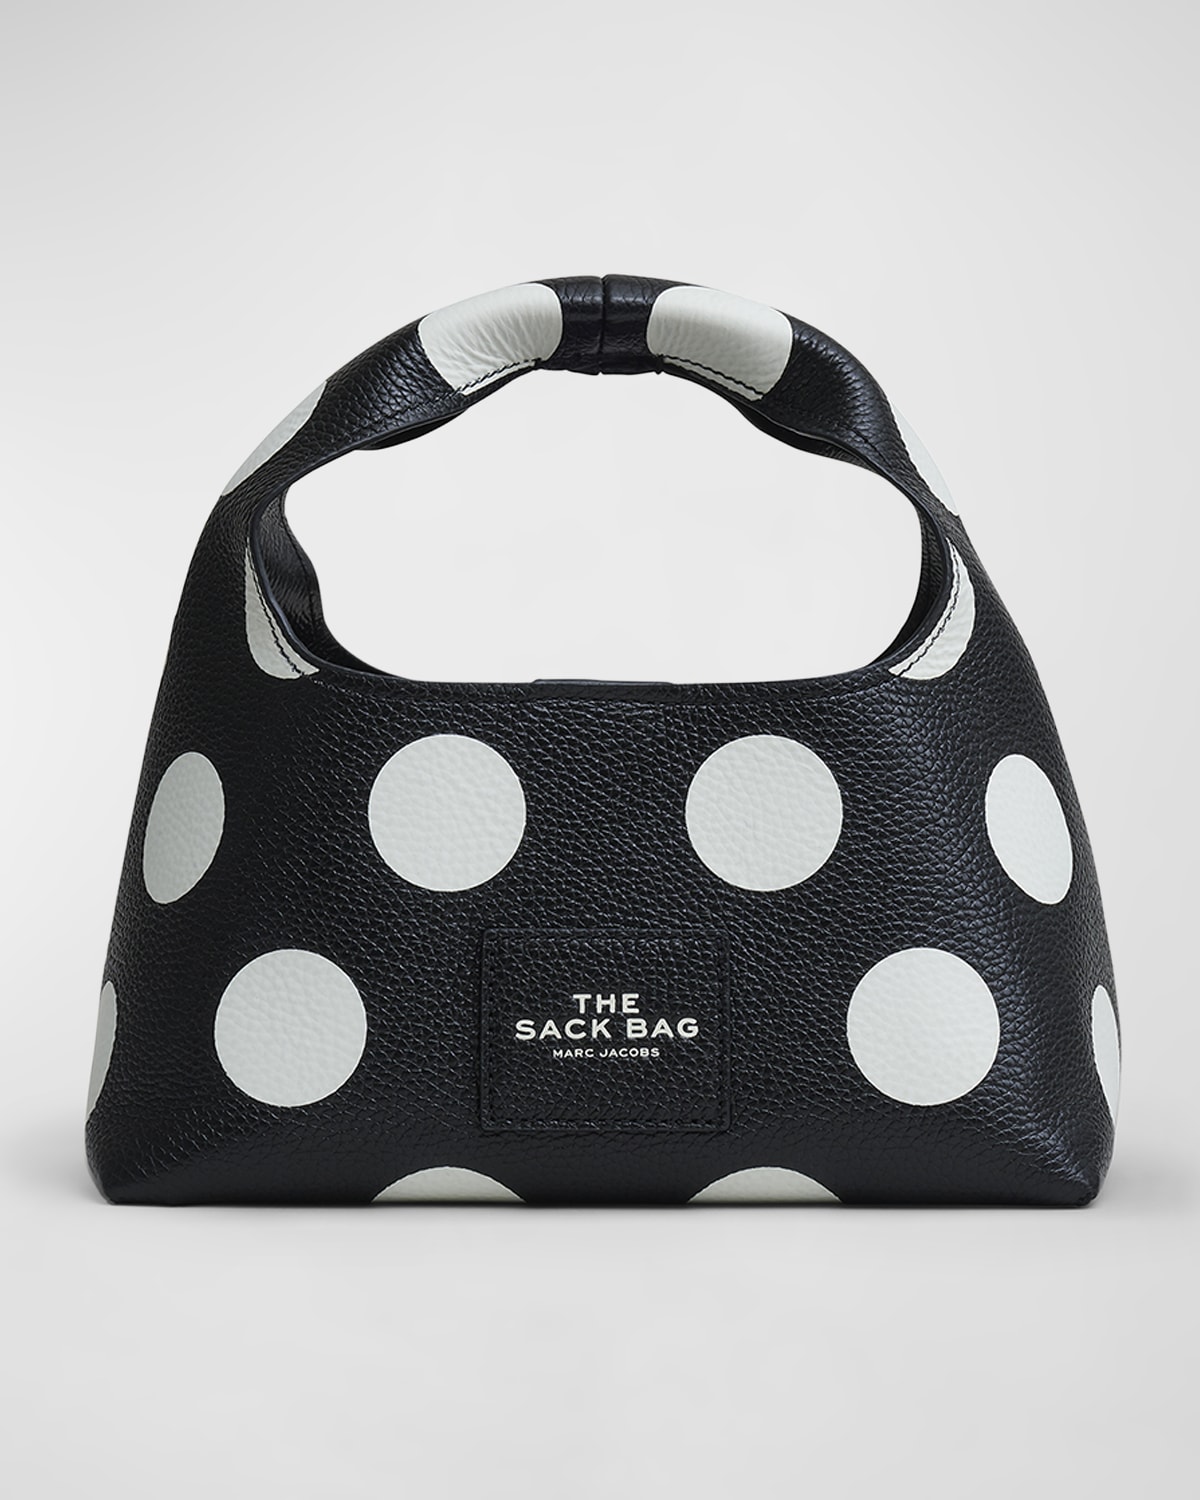 Marc Jacobs Bag accessories for Women